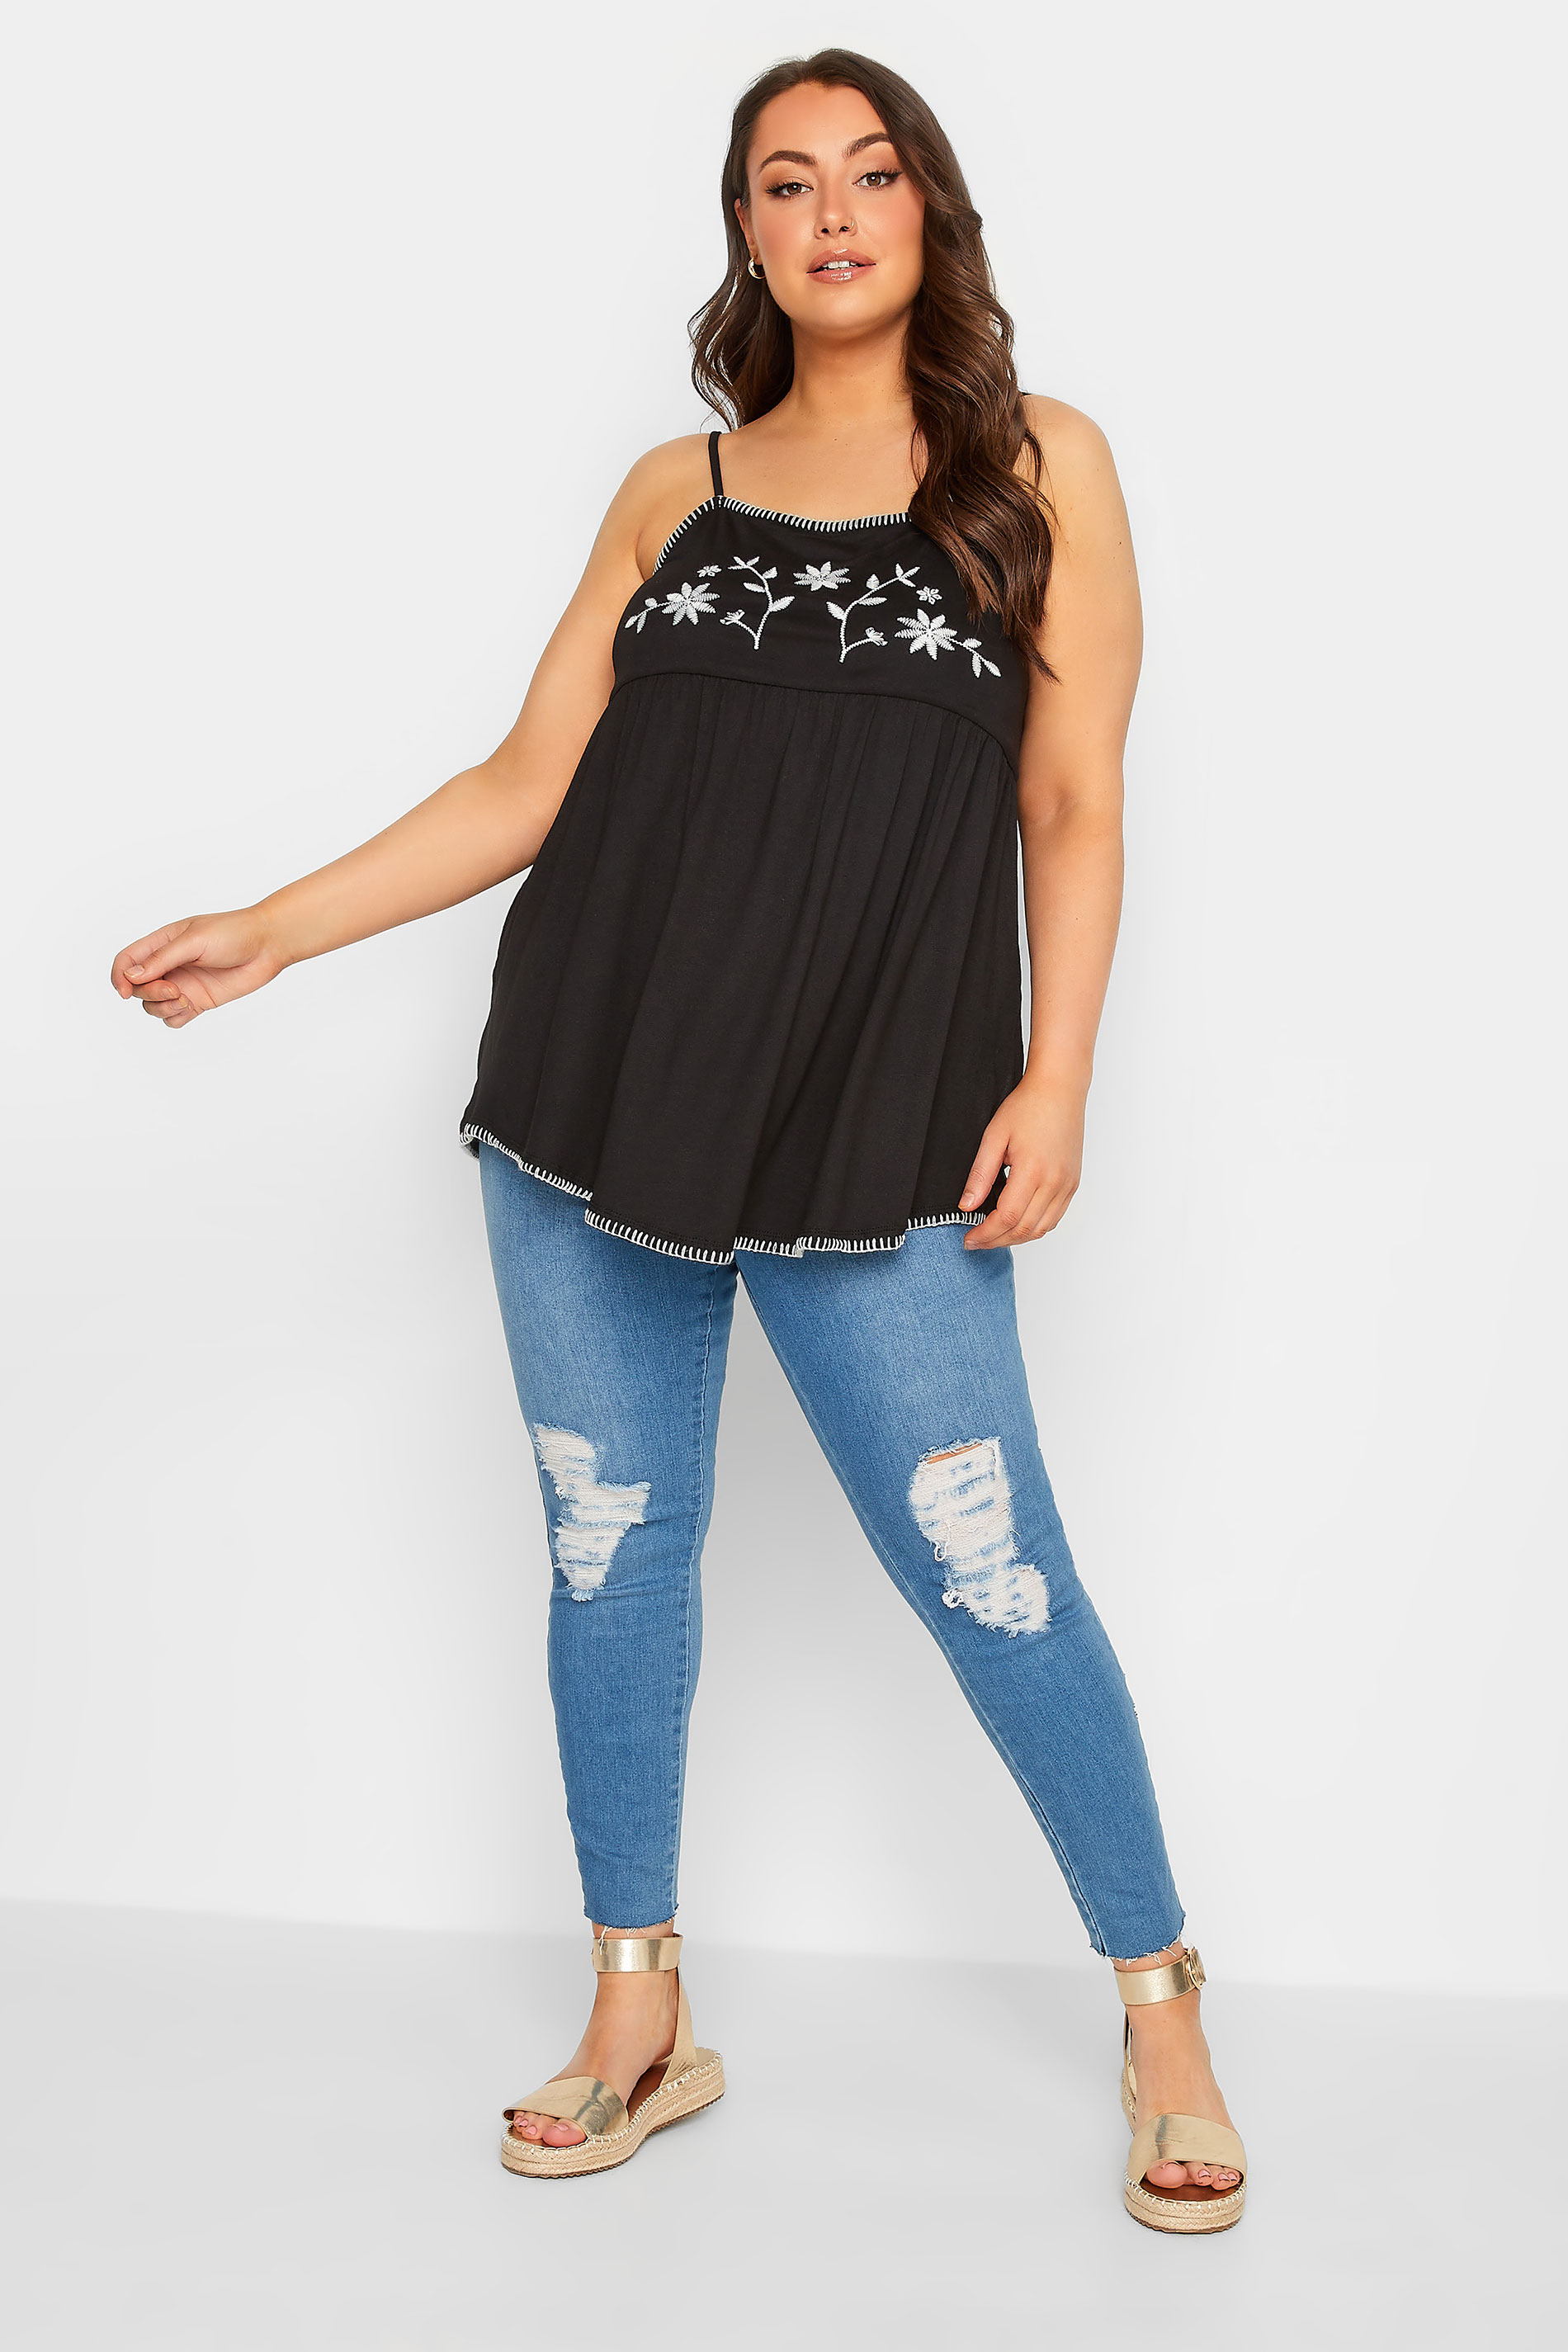 YOURS Curve Plus Size Black Embroidered Flower Swing Vest Top | Yours Clothing  2